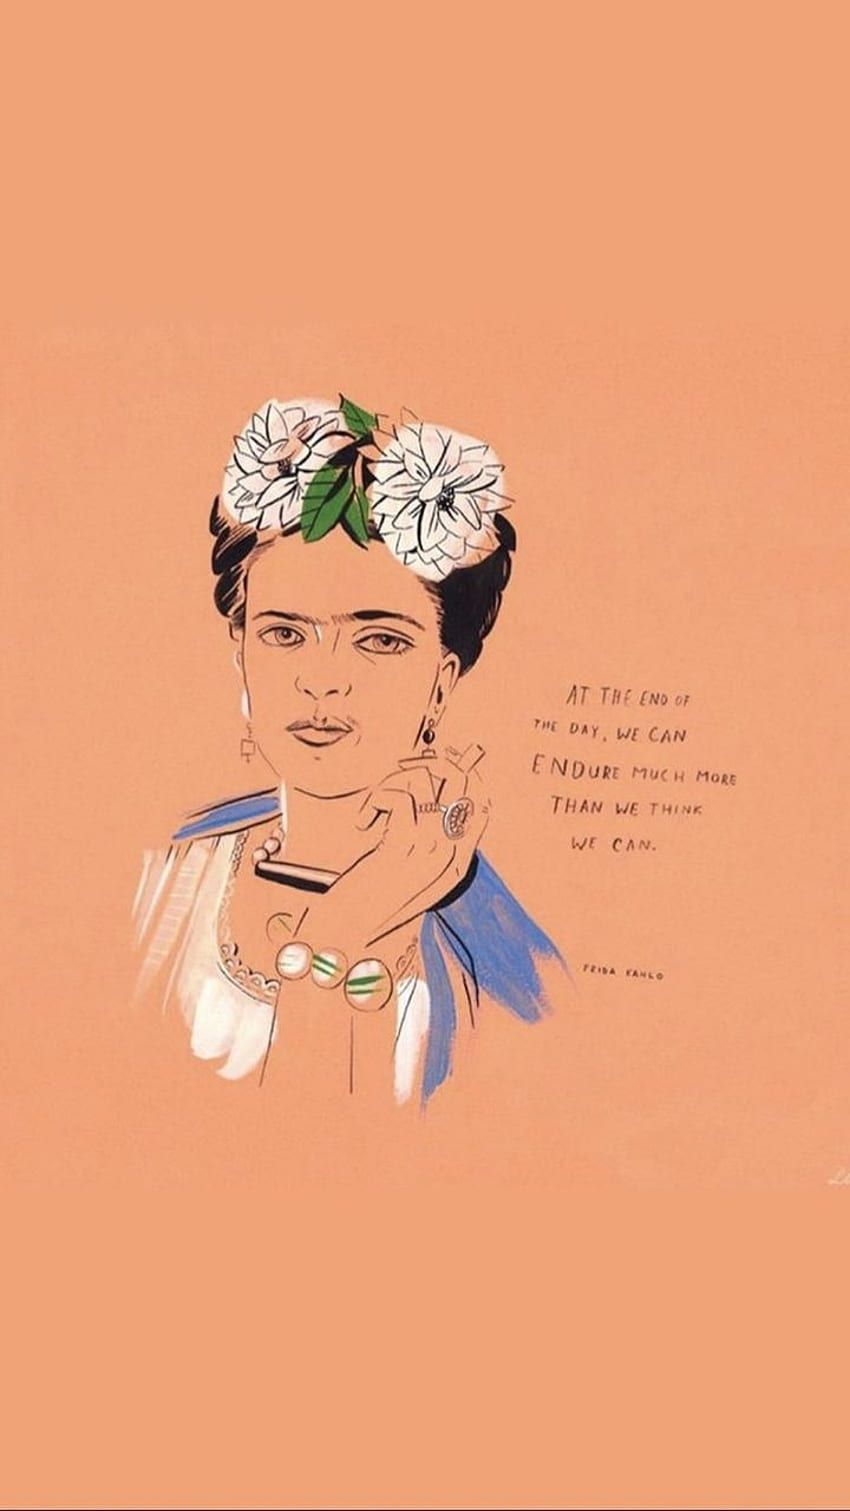 A drawing of Frida Kahlo with a flower crown and a quote next to her face. - Frida Kahlo